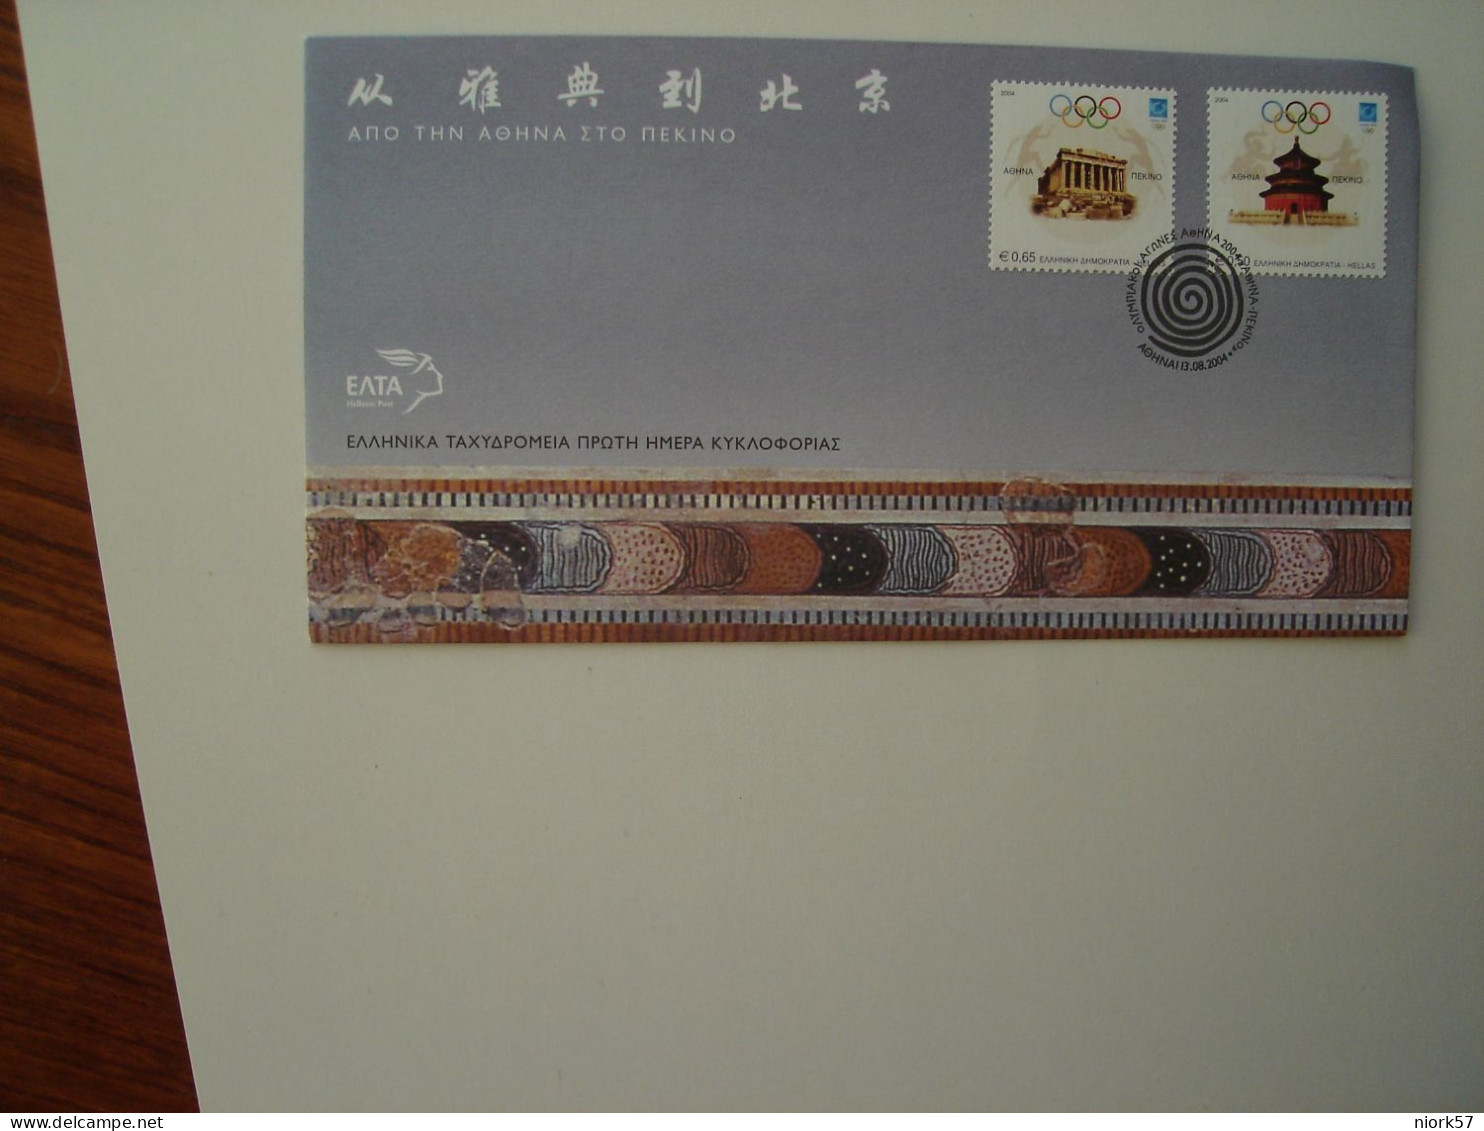 GREECE FDC 2004 OLYMPIC GAMES 2004 ATHENS BEIJING - Sommer 2004: Athen - Paralympics